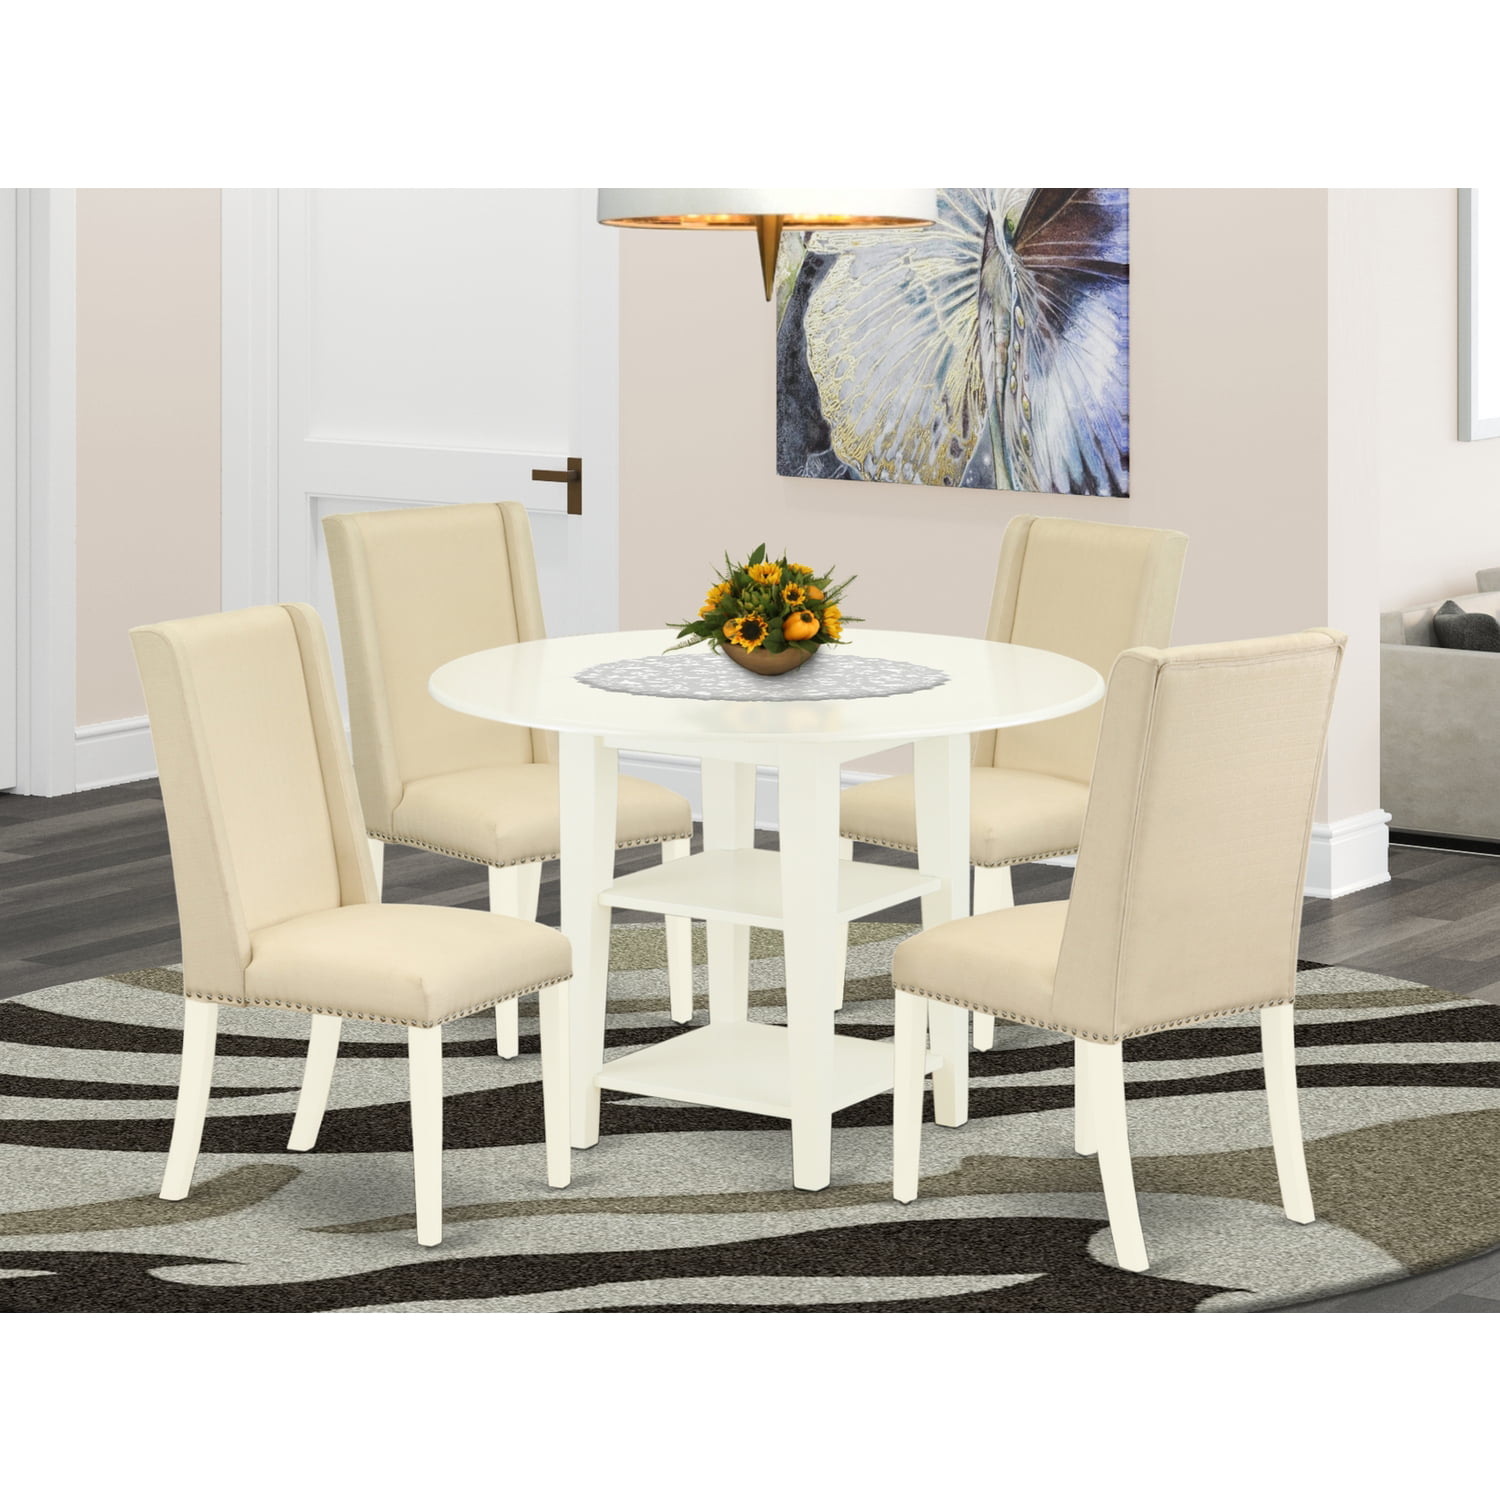 Lwh 01 5 Piece Dining Table Set, 4 Person Dining Table And Chairs